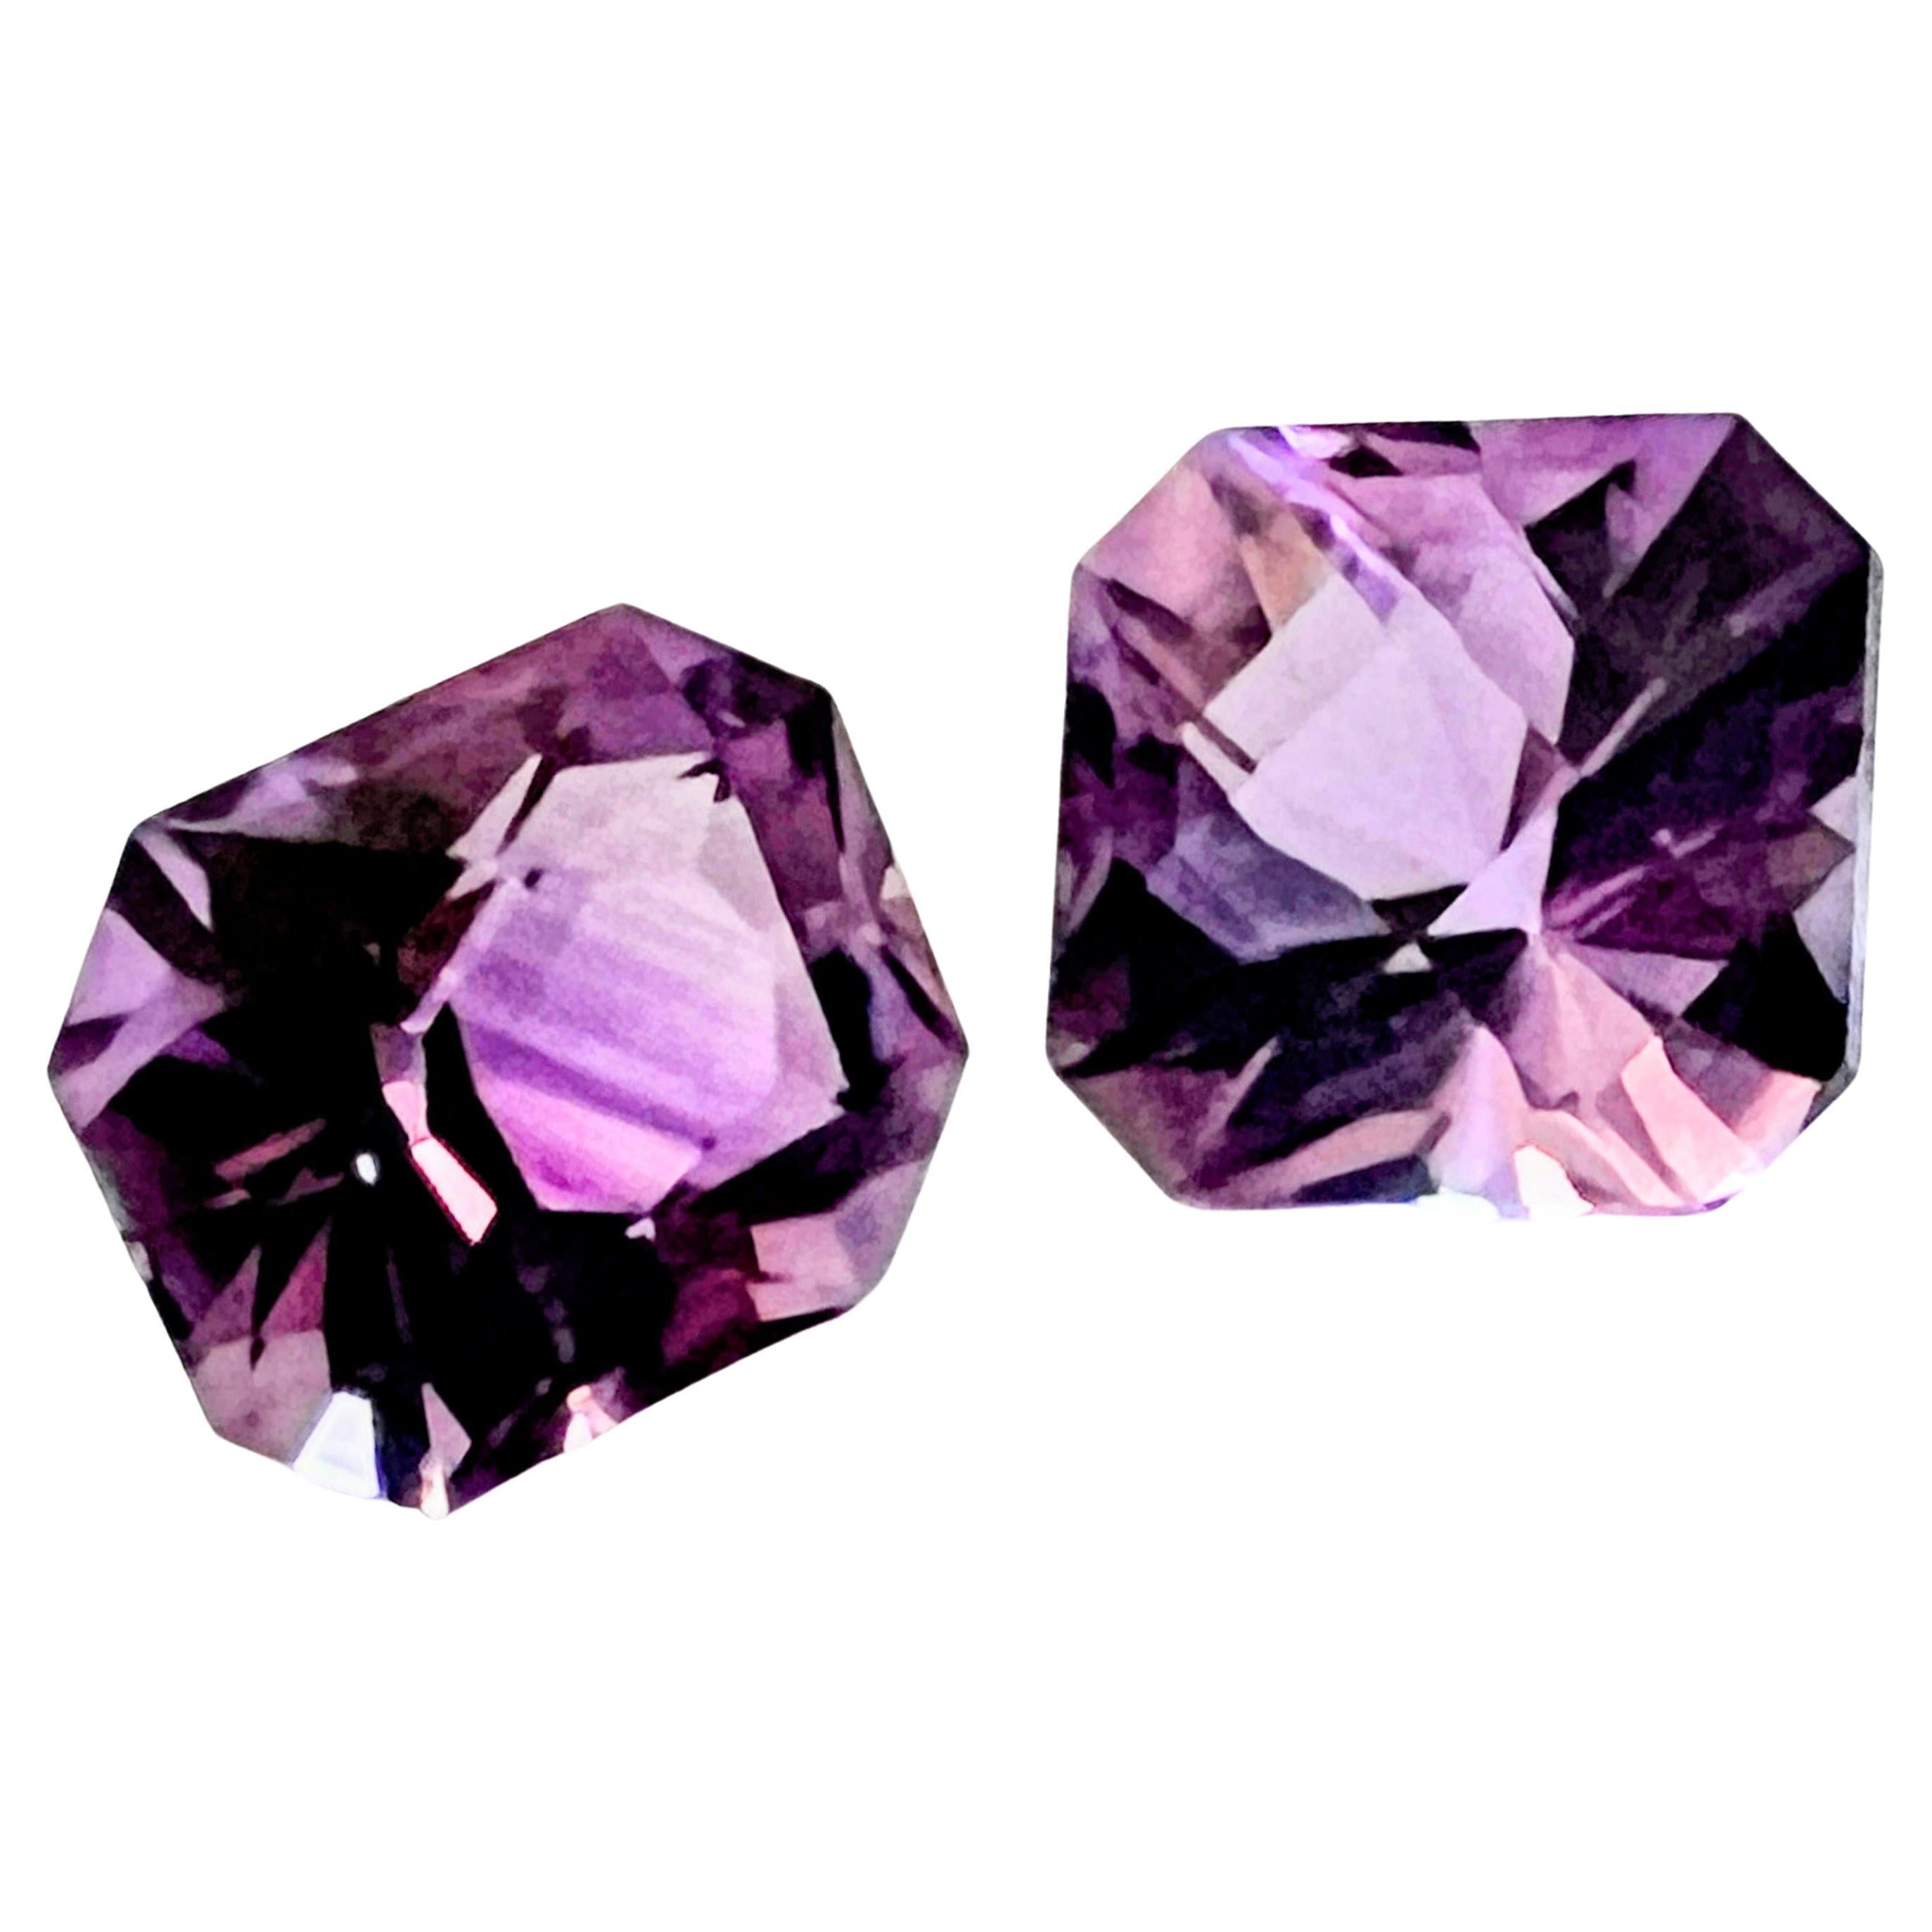 Create a jewelry design with this stunning pair of 1.75ct Asscher Cut Purple Amethyst Loose Gemstones. These gems are a testament to the captivating beauty of natural amethyst, and their estimated measurements highlight their remarkable